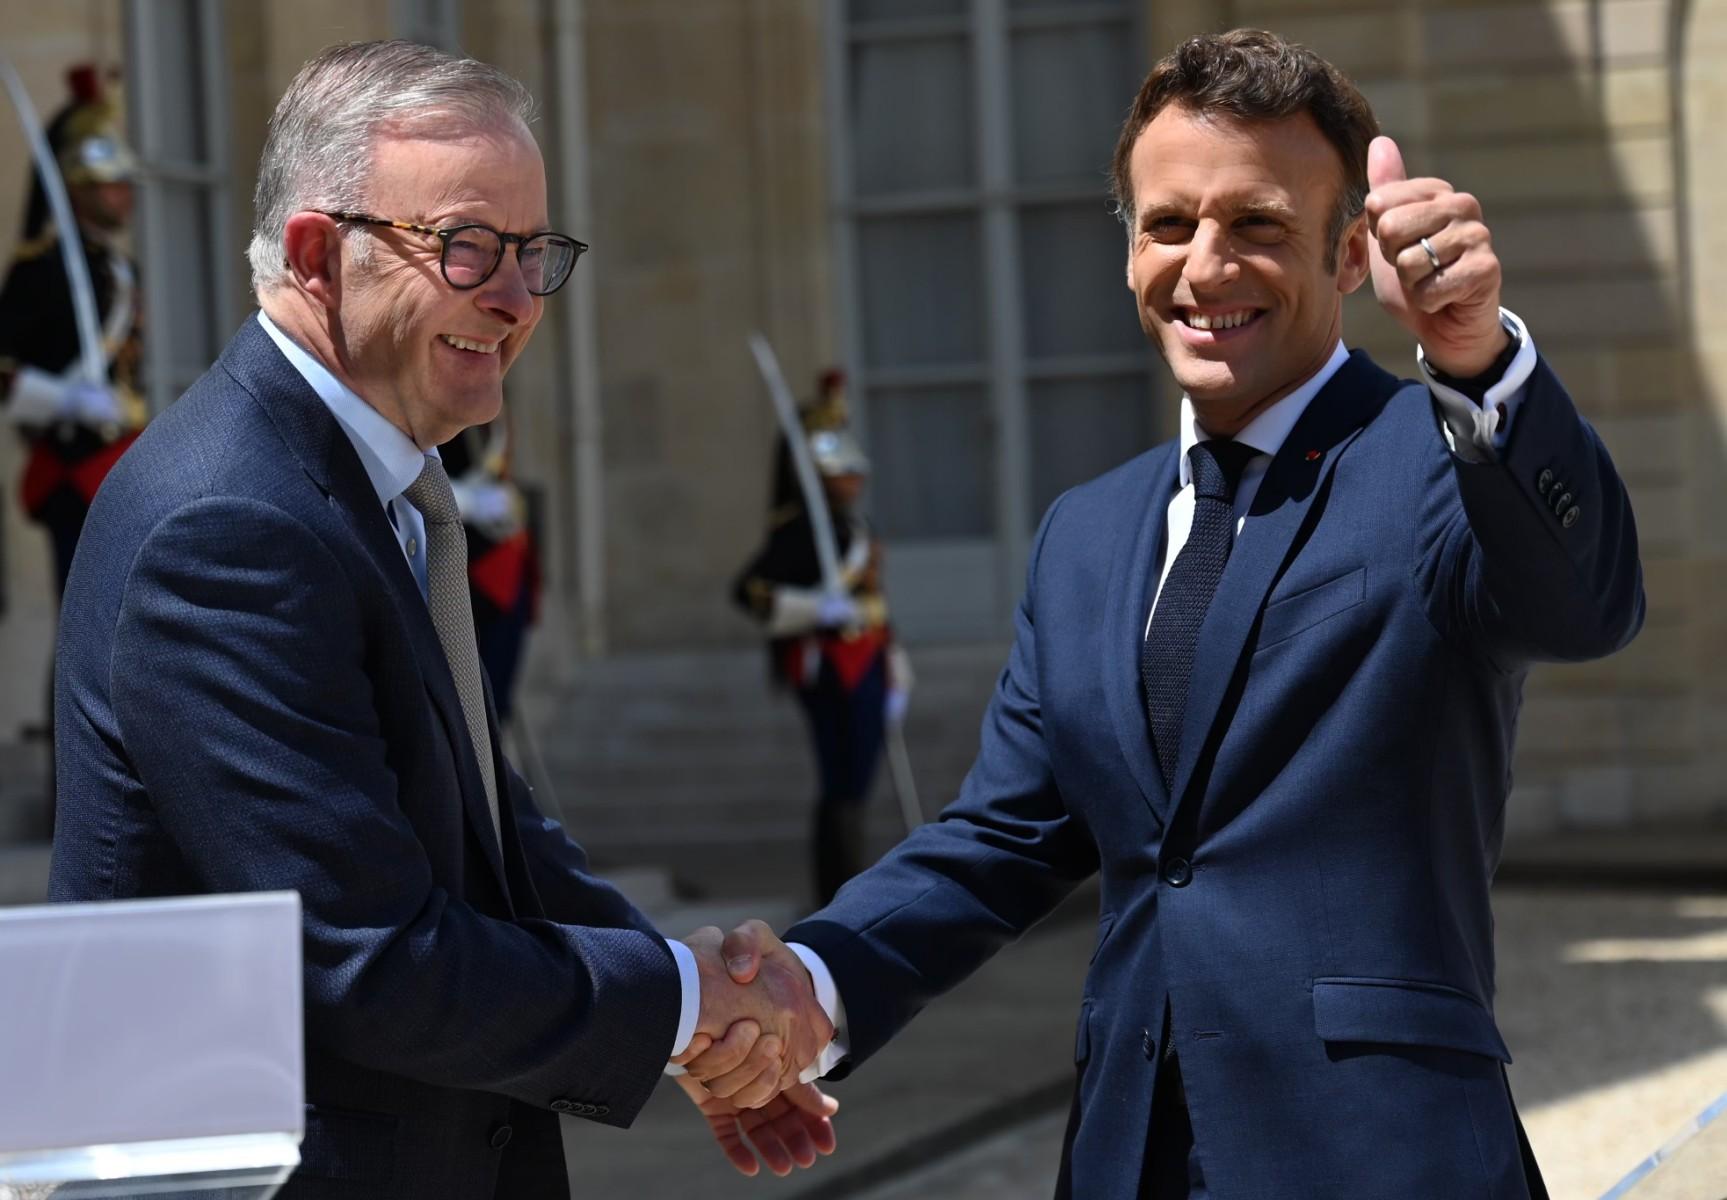 Australia's Prime Minister Anthony Albanese (left) and France's President Emmanuel Macron shake hands as they speak to the press prior to a working lunch at the presidential Elysee Palace in Paris on July 1. Photo: AFP